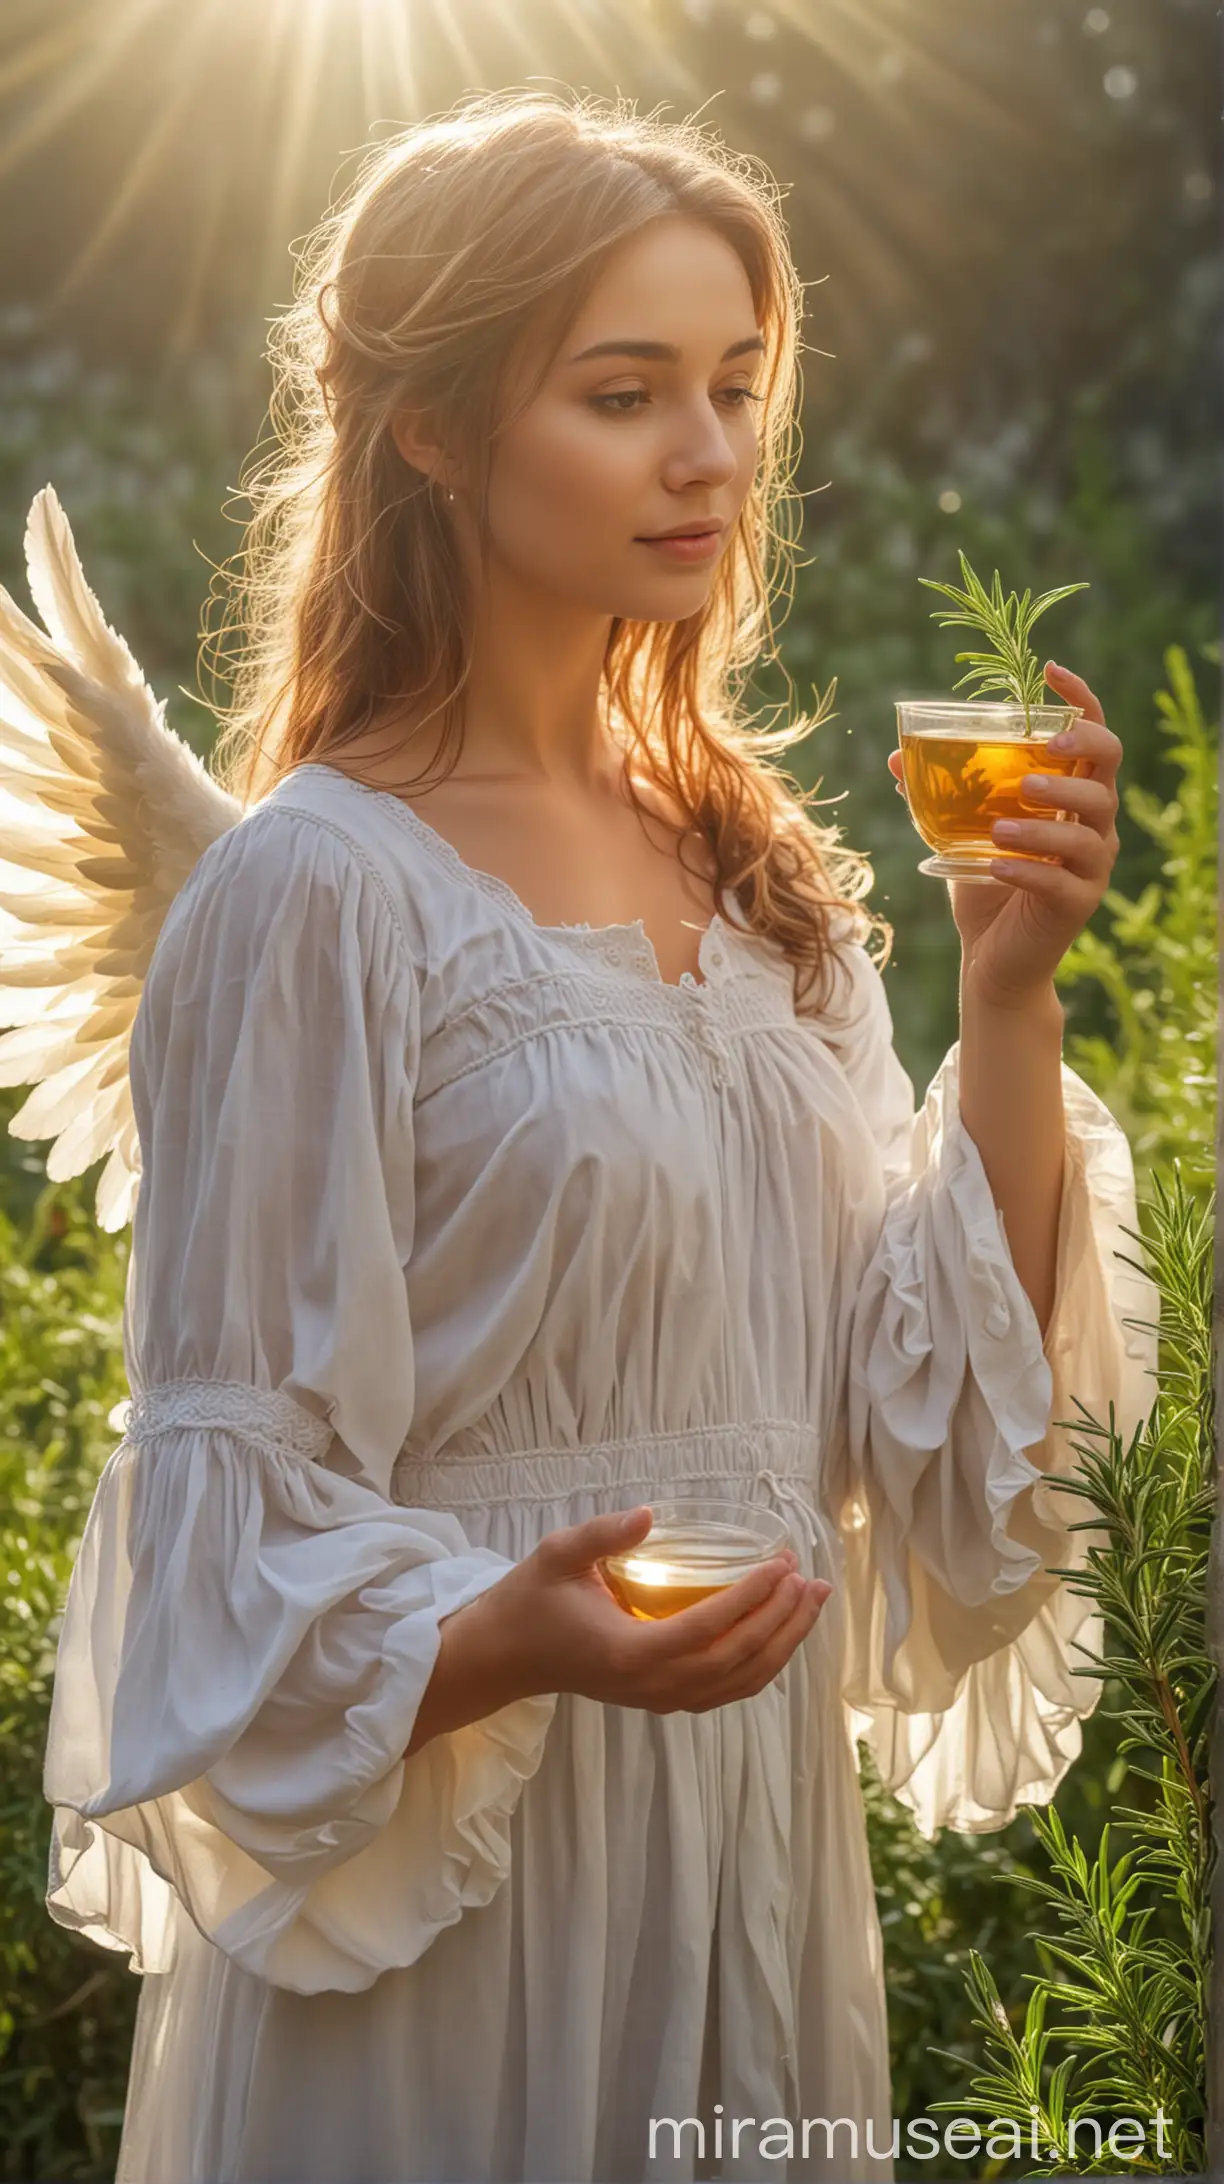 Beautiful Angel women and holding rosemary Tea on hand, natural background, sun light effect, 4k, HDR, morning time weather